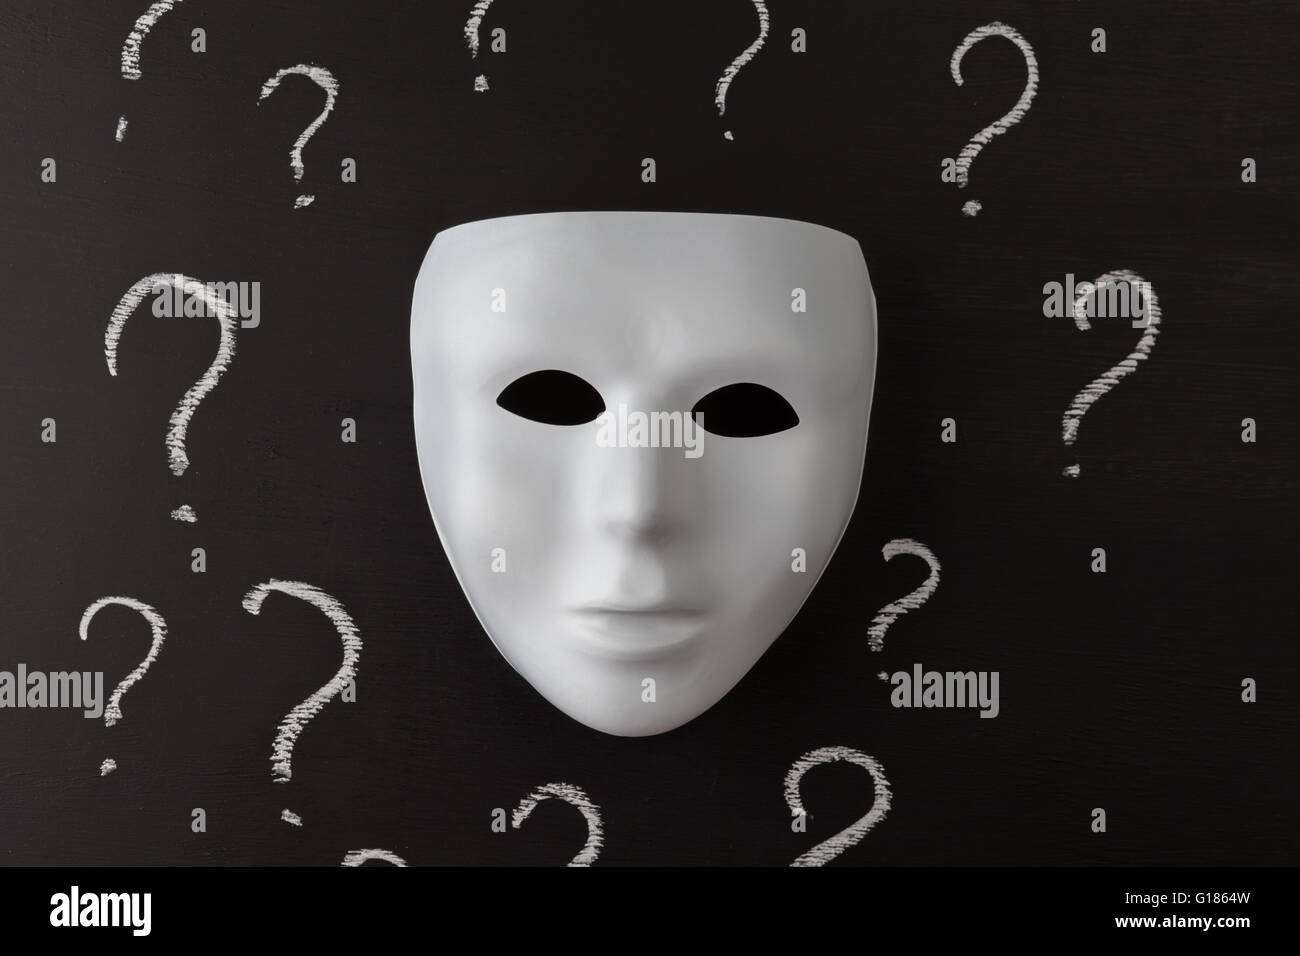 White mask on black background with hand drawn chalk question marks. Who am I ? Identity concept. Horizontal image. Stock Photo